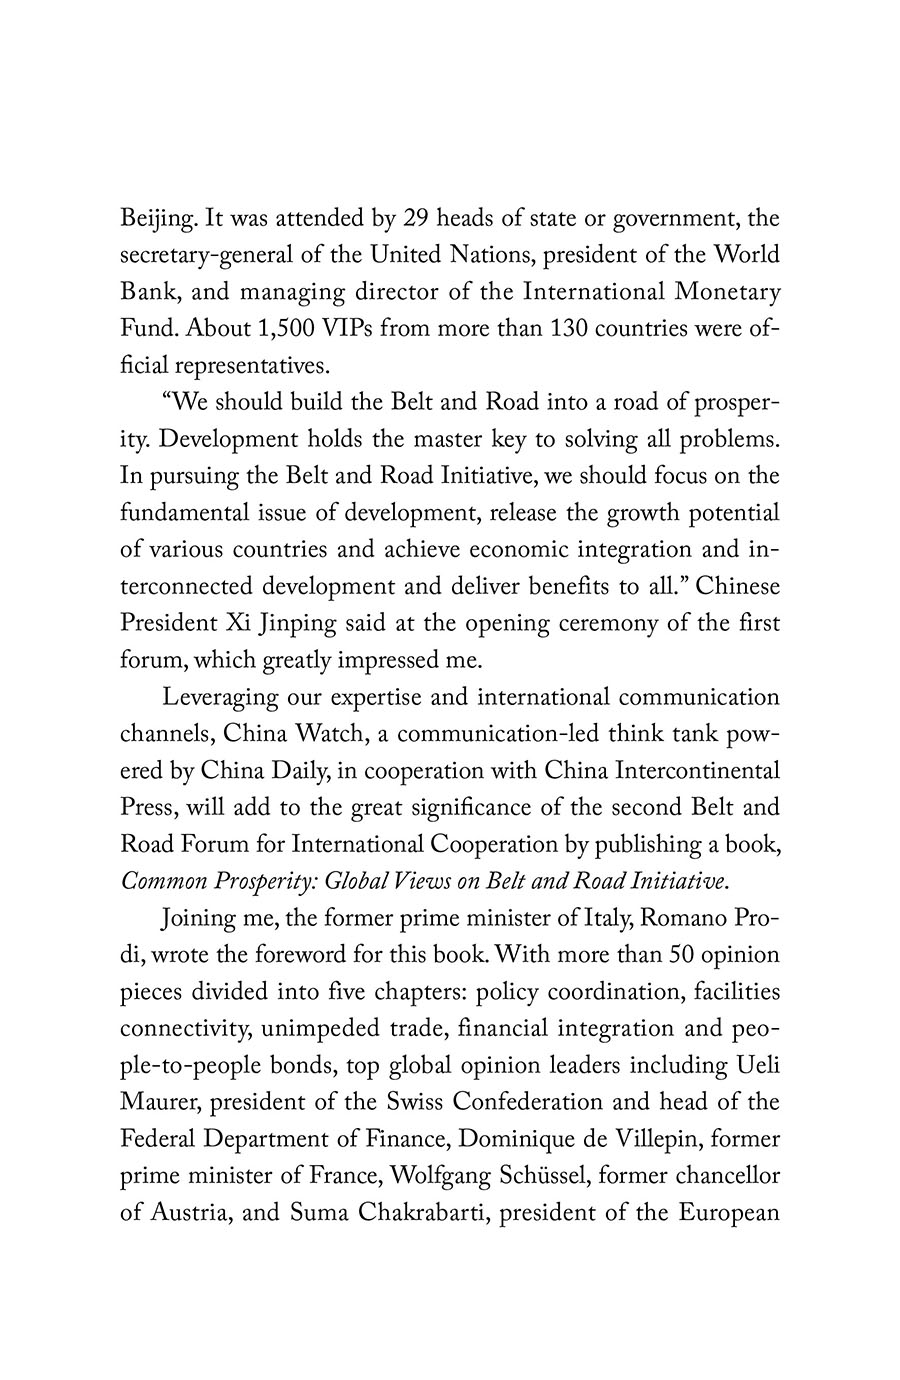 Sample pages of Common Prosperity: Global Views on Belt and Road Initiative (ISBN:9787508541297)